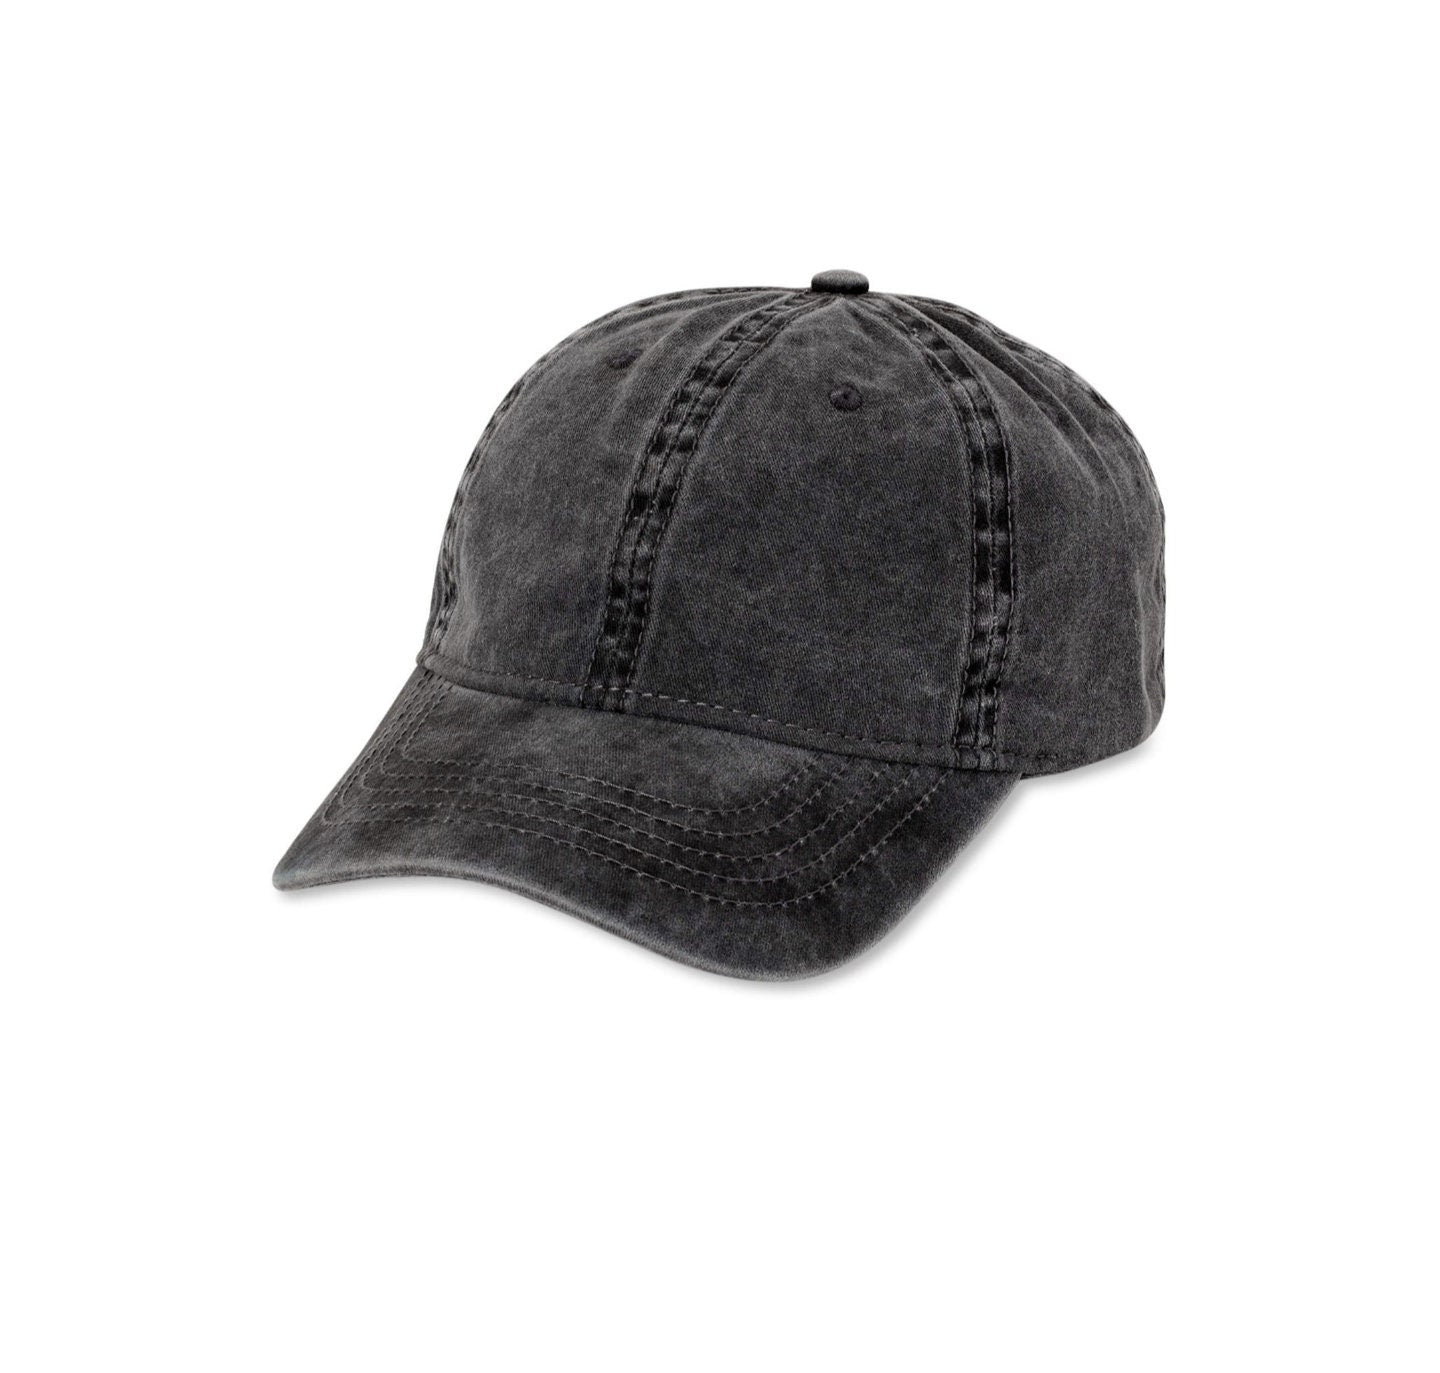 Officially Licensed Illyrian Training Camp Vintage Washed Baseball Cap - Quill & Cauldron